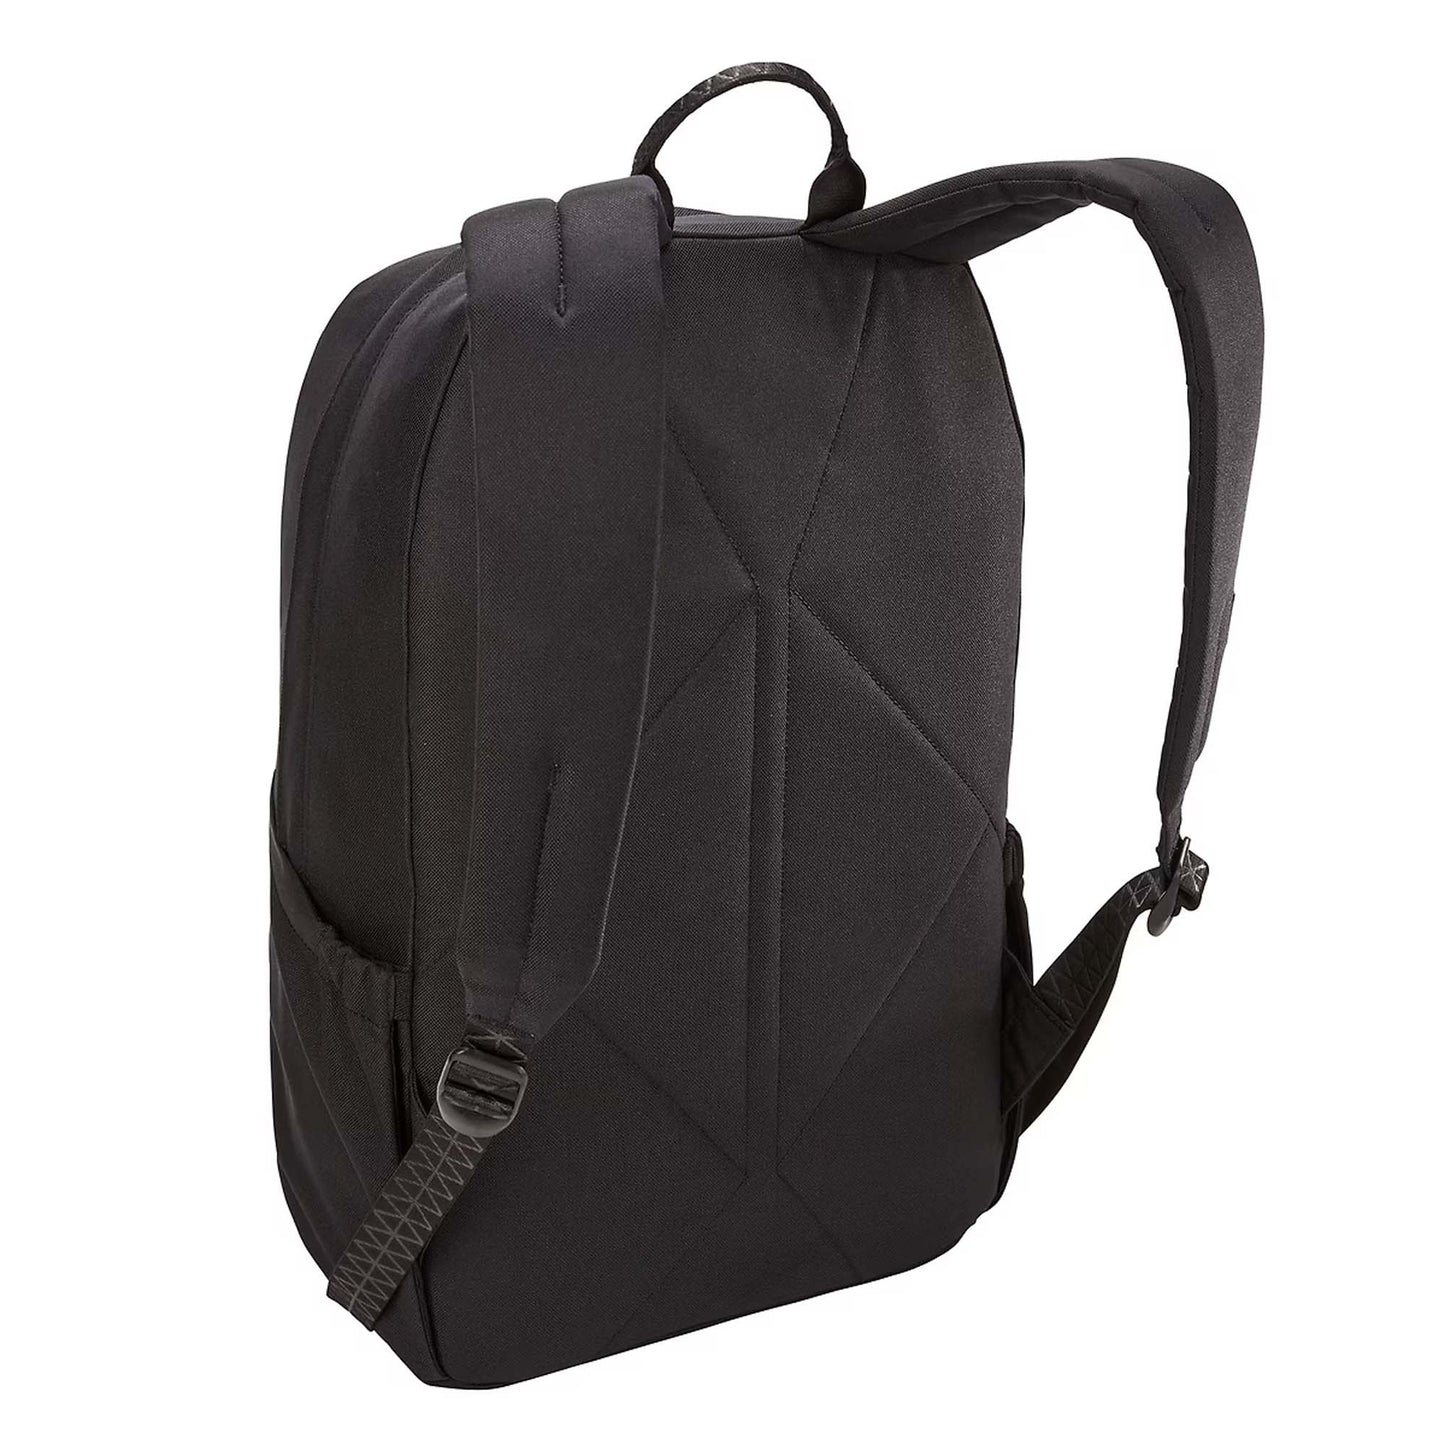 Thule Indago 23L Backpack - Fit up to 15.6" Laptop or 16" MacBook - Black (Barcode: 0085854247948 )